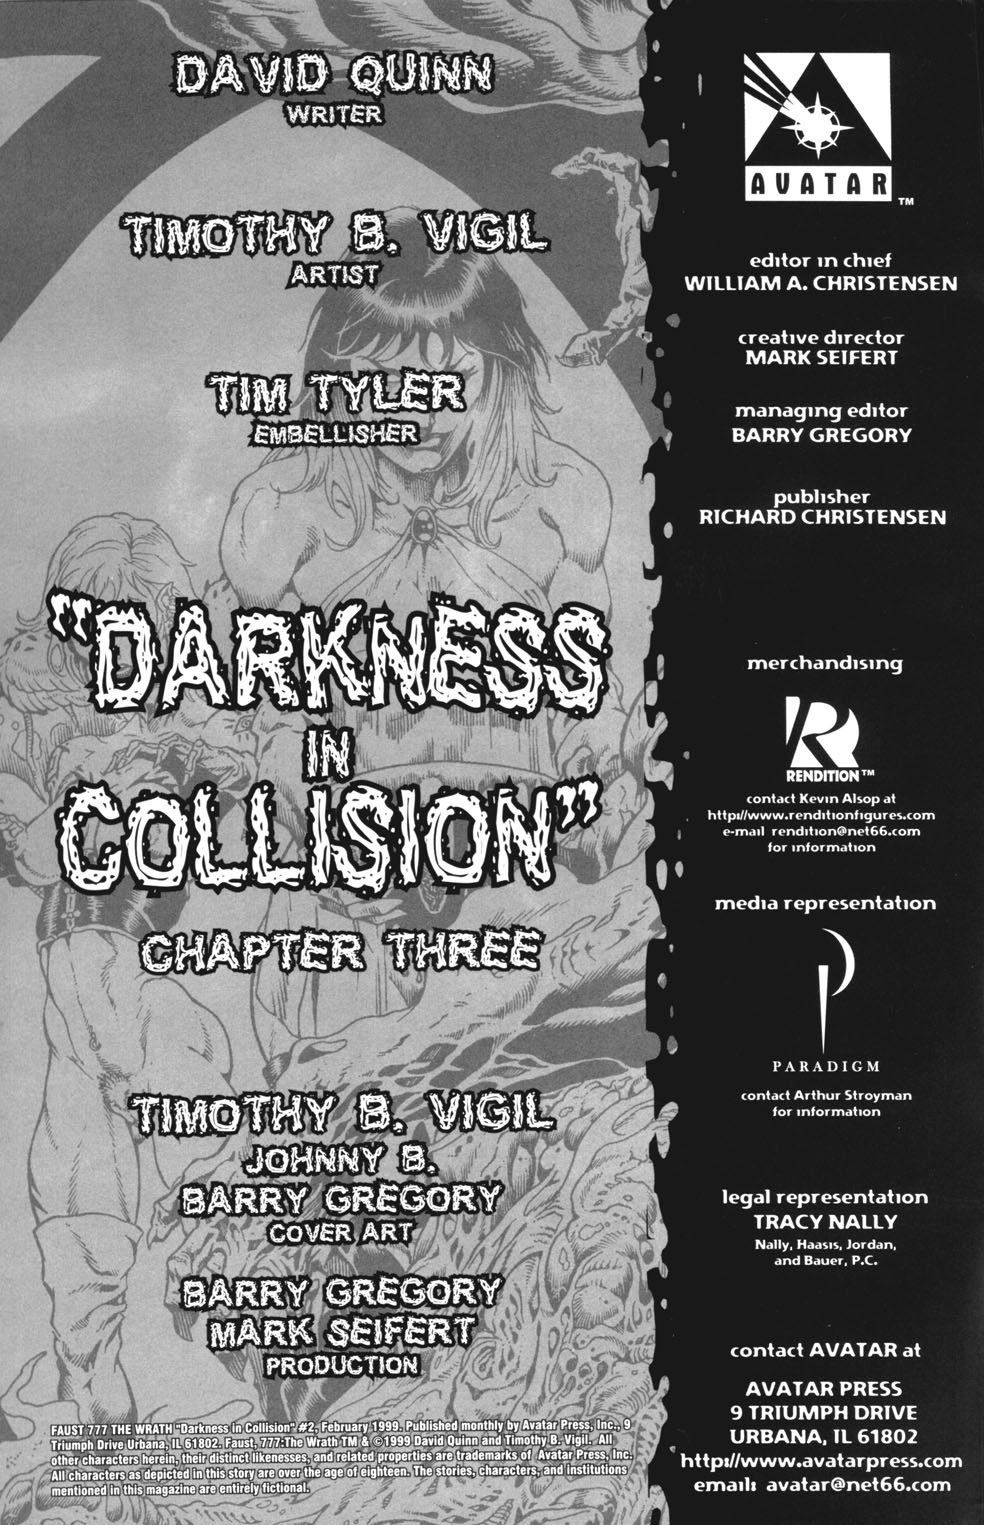 Faust 777 The Wrath-Darkness In Collision 02 3